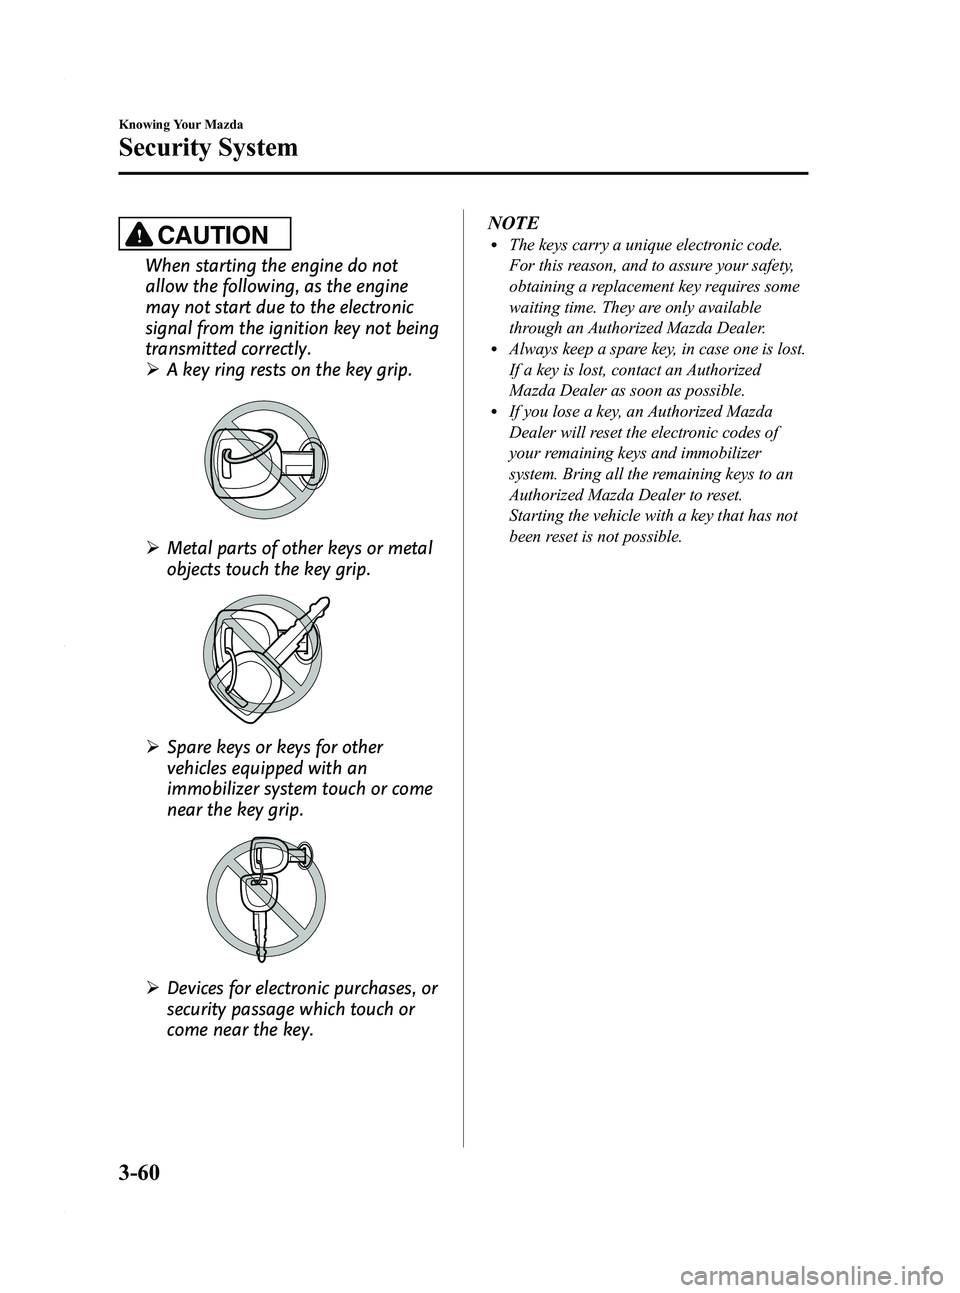 MAZDA MODEL 3 5-DOOR 2012  Owners Manual Black plate (138,1)
CAUTION
When starting the engine do not
allow the following, as the engine
may not start due to the electronic
signal from the ignition key not being
transmitted correctly.
ØA key